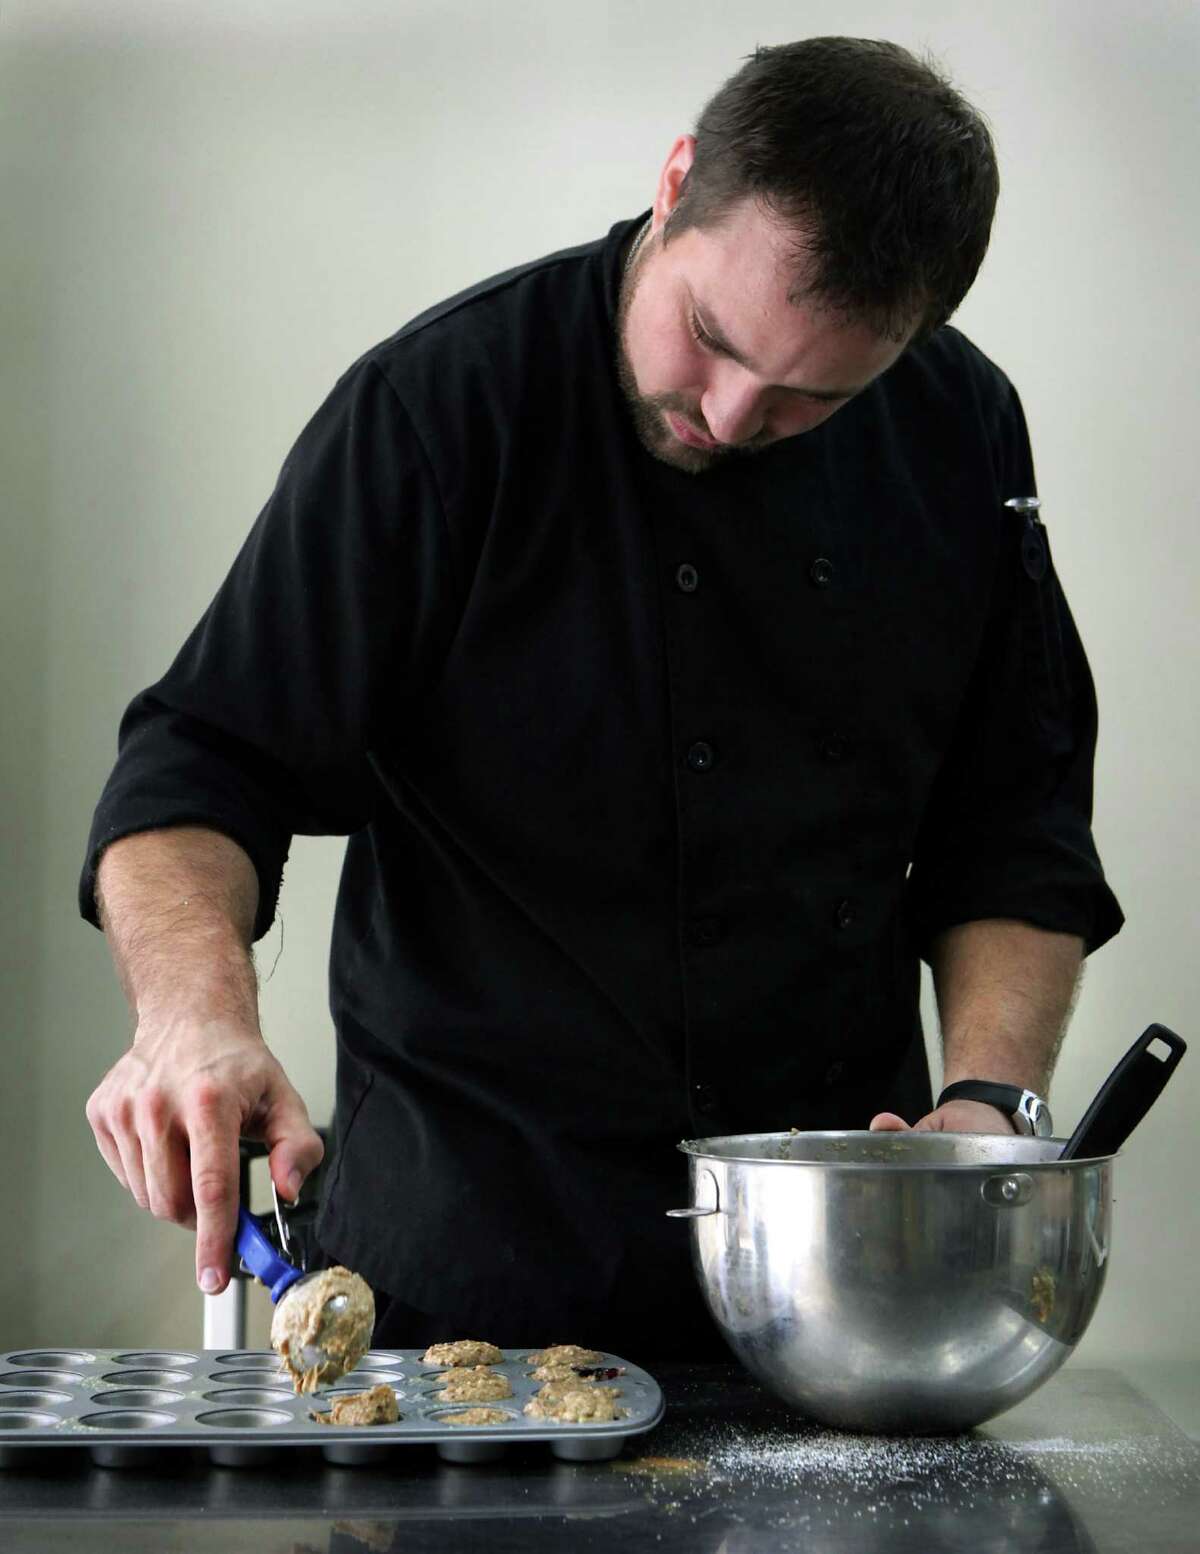 Keith Cruzan, Executive Chef at Bake Broil and Brew, has lost 70 lbs, having changed his diet to healthier foods. Cruzan is making Wheat Blueberry Muffins. Tuesday, June 14, 2012.